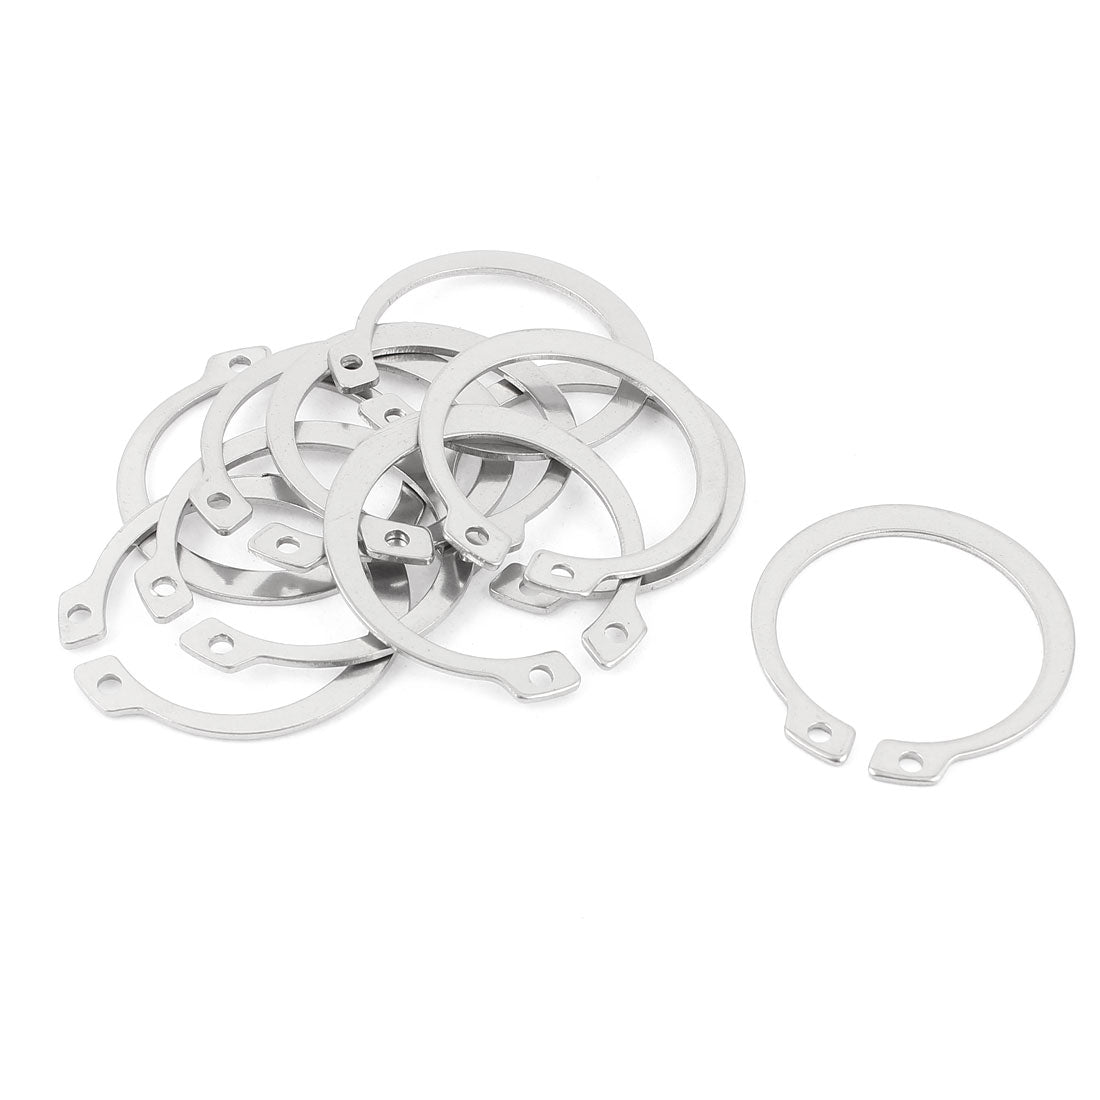 uxcell Uxcell 10pcs 304 Stainless Steel External Circlip Retaining Shaft Snap Rings 35mm